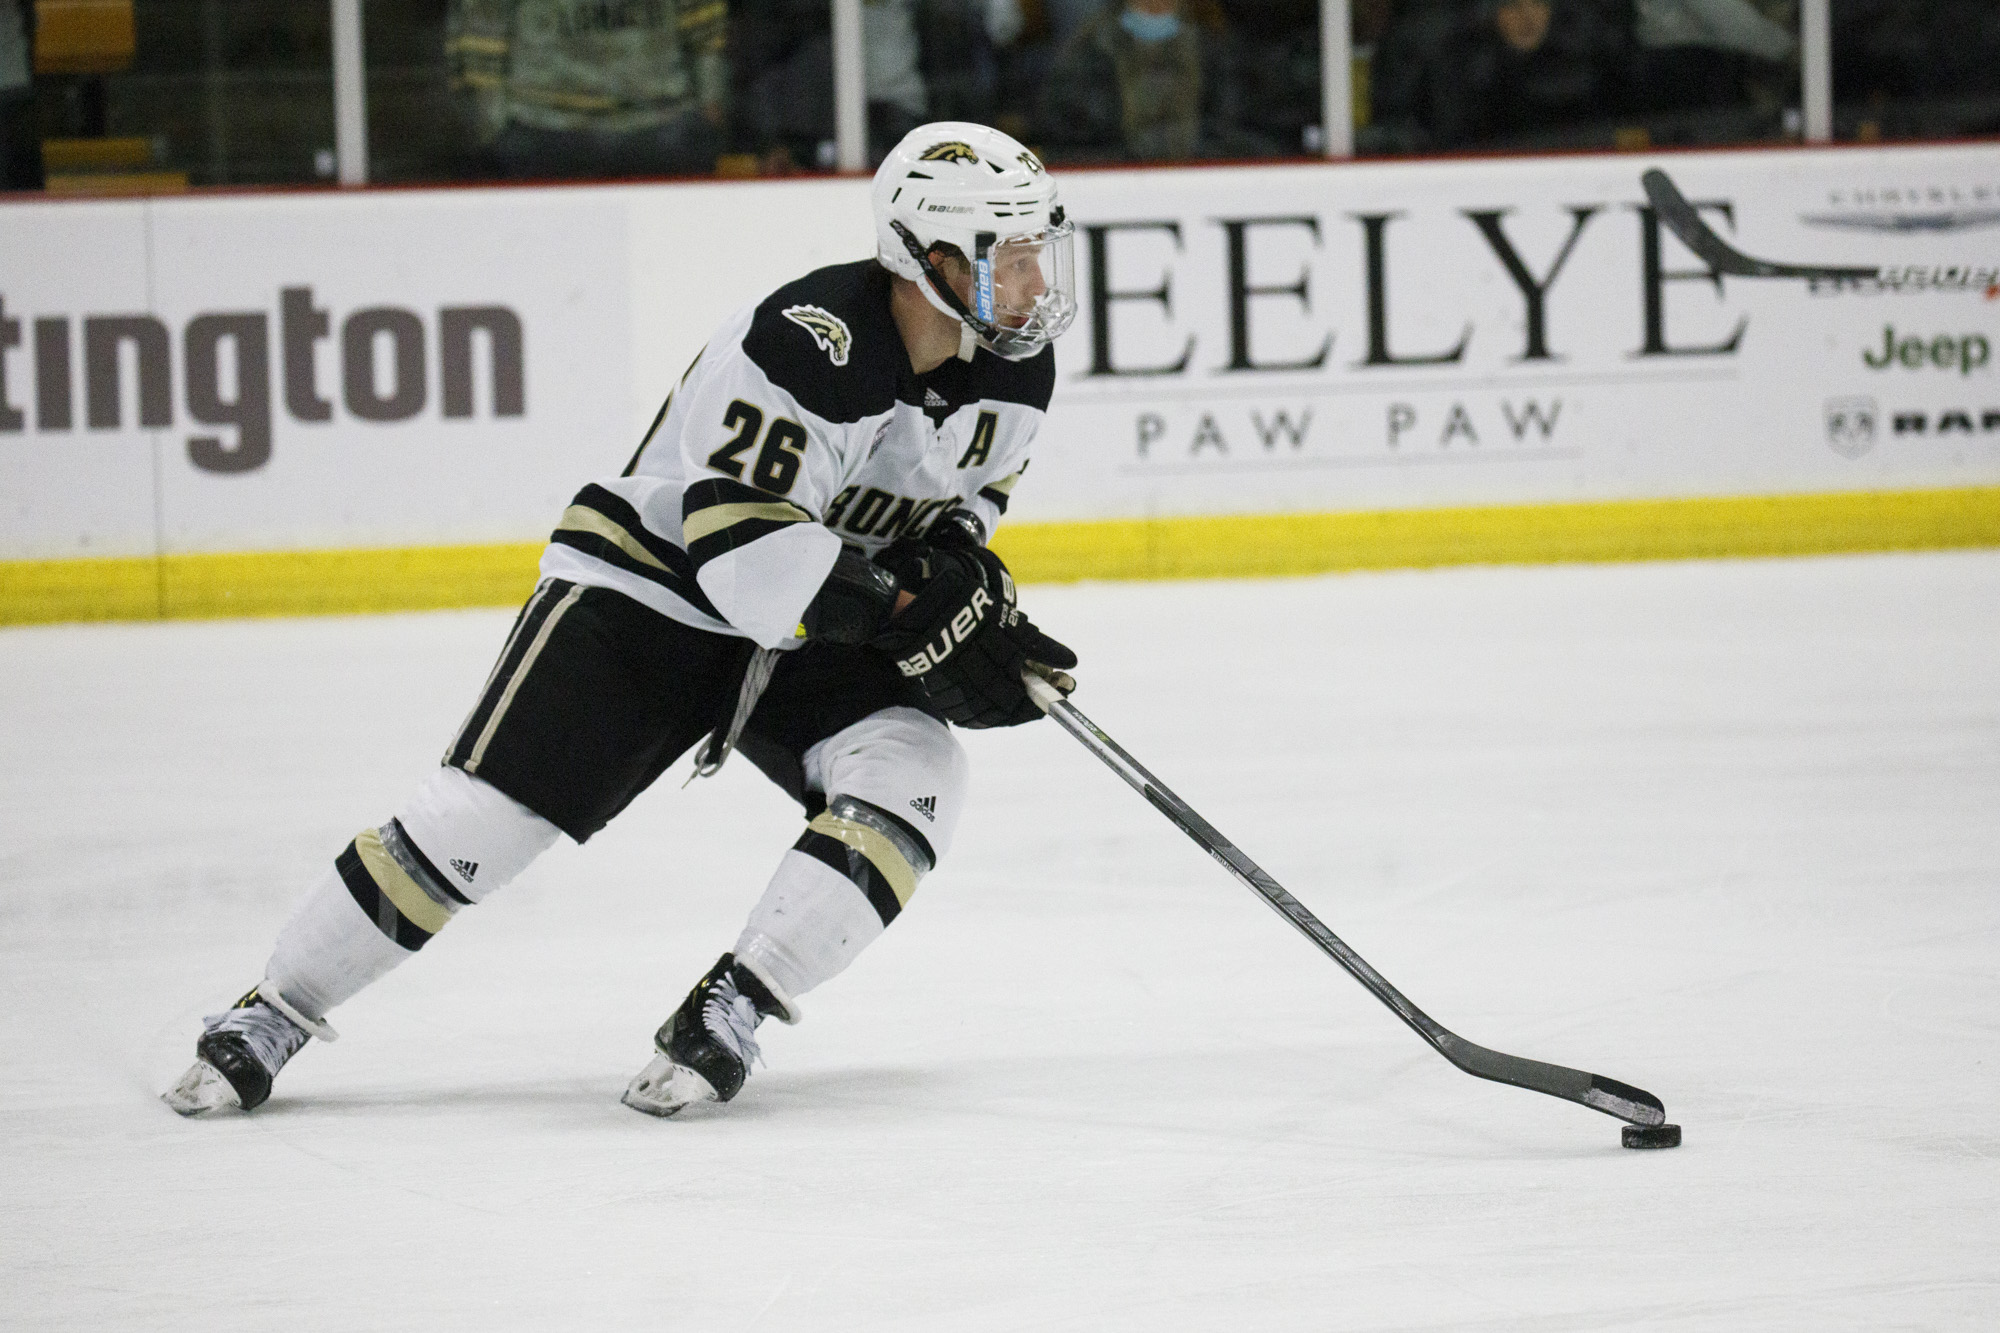 Ethen Franks 4 goals lead 13th-ranked WMU hockey to win over No picture